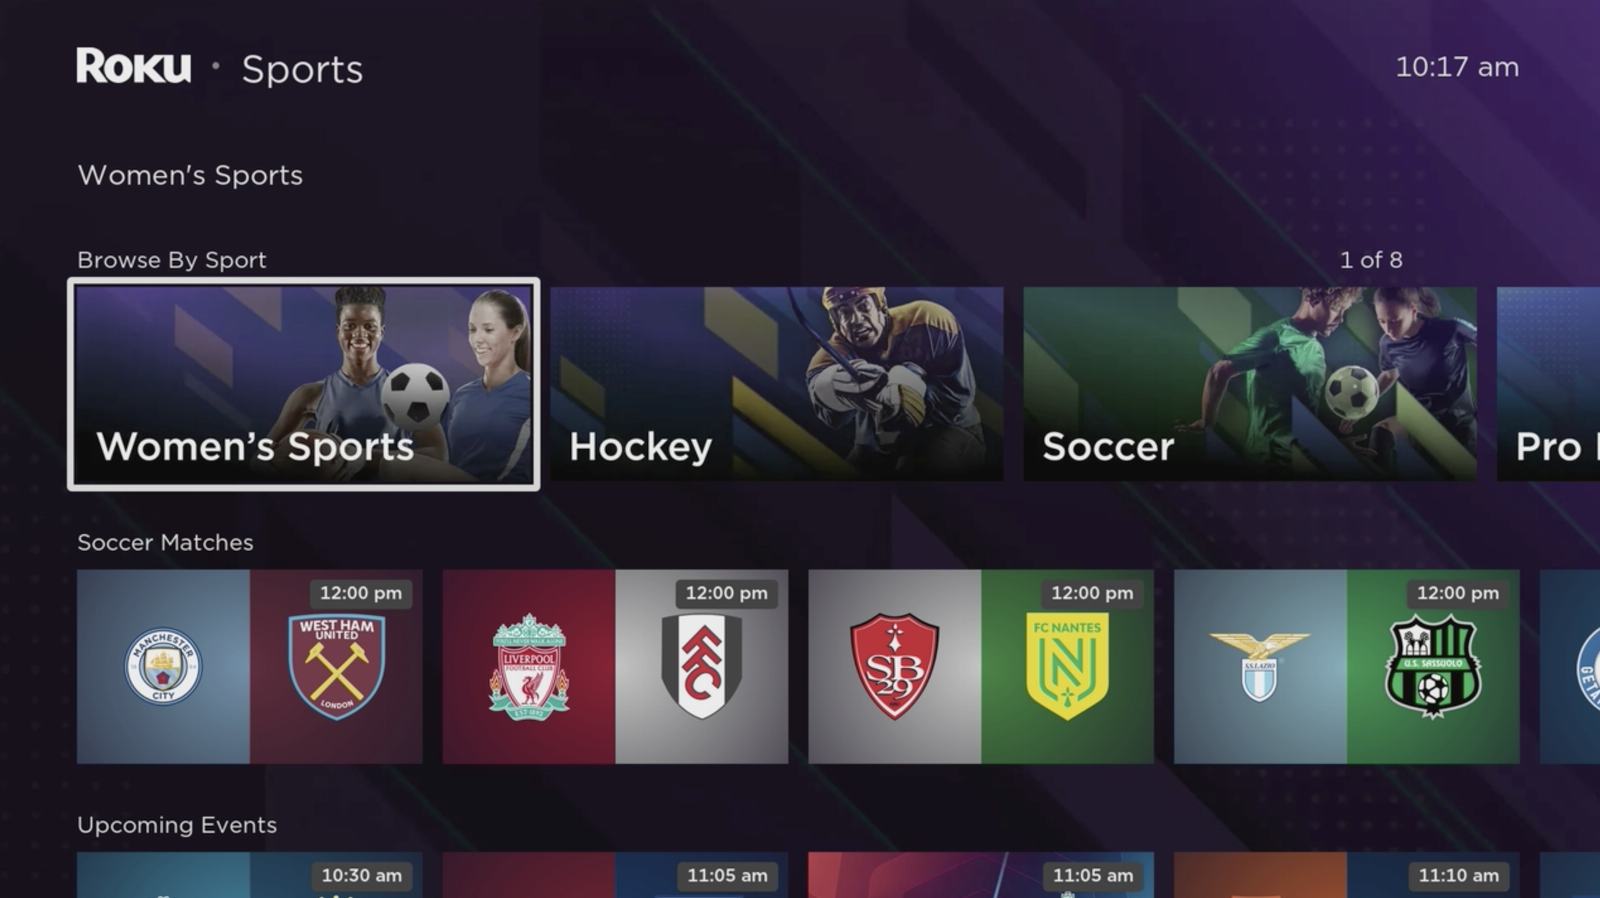 Roku launches new sports hub dedicated to women’s sporting events